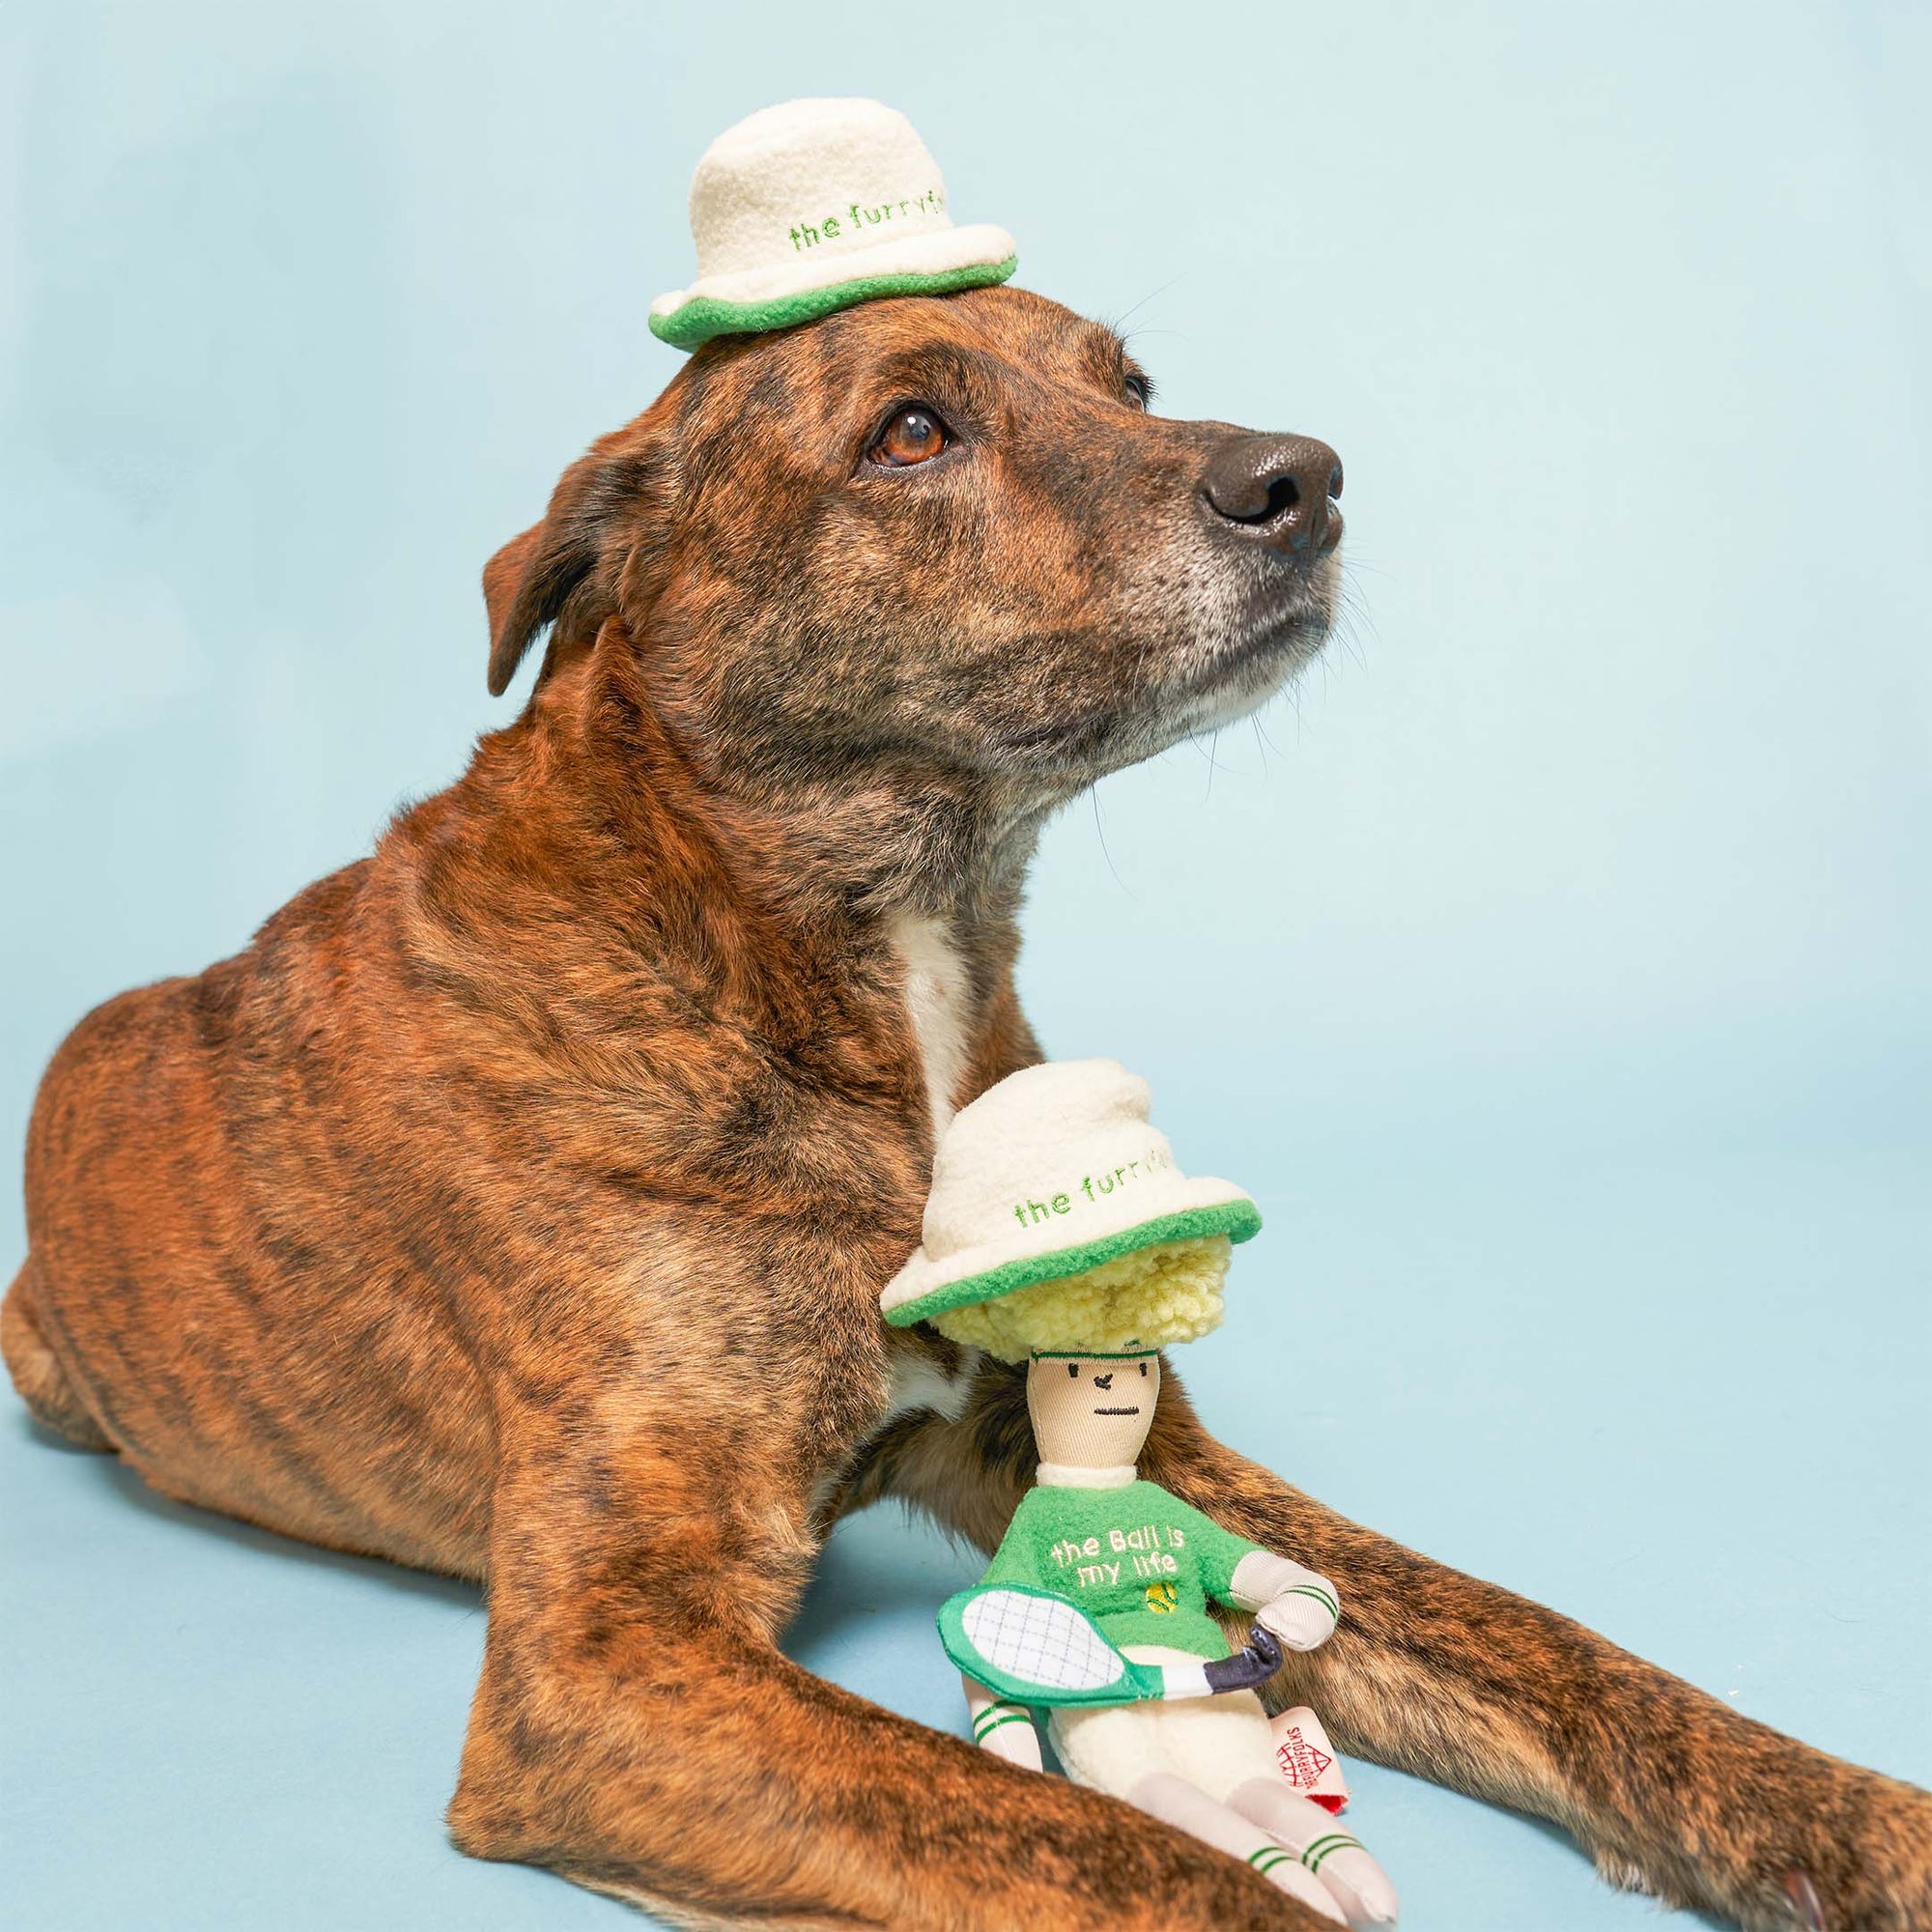 The brindle dog is wearing a plush tennis hat similar to that of a toy, which is positioned between its paws. The hat on both the dog and the toy reads, "The furryfolks." The toy is styled as a tennis player with a green sweater that says "the ball is my life" and holds a tennis racket. With a serene and noble expression, the dog looks off to the side, adding a dignified yet whimsical touch to the scene. The background is a soft blue, enhancing the light-hearted and playful atmosphere of the image.